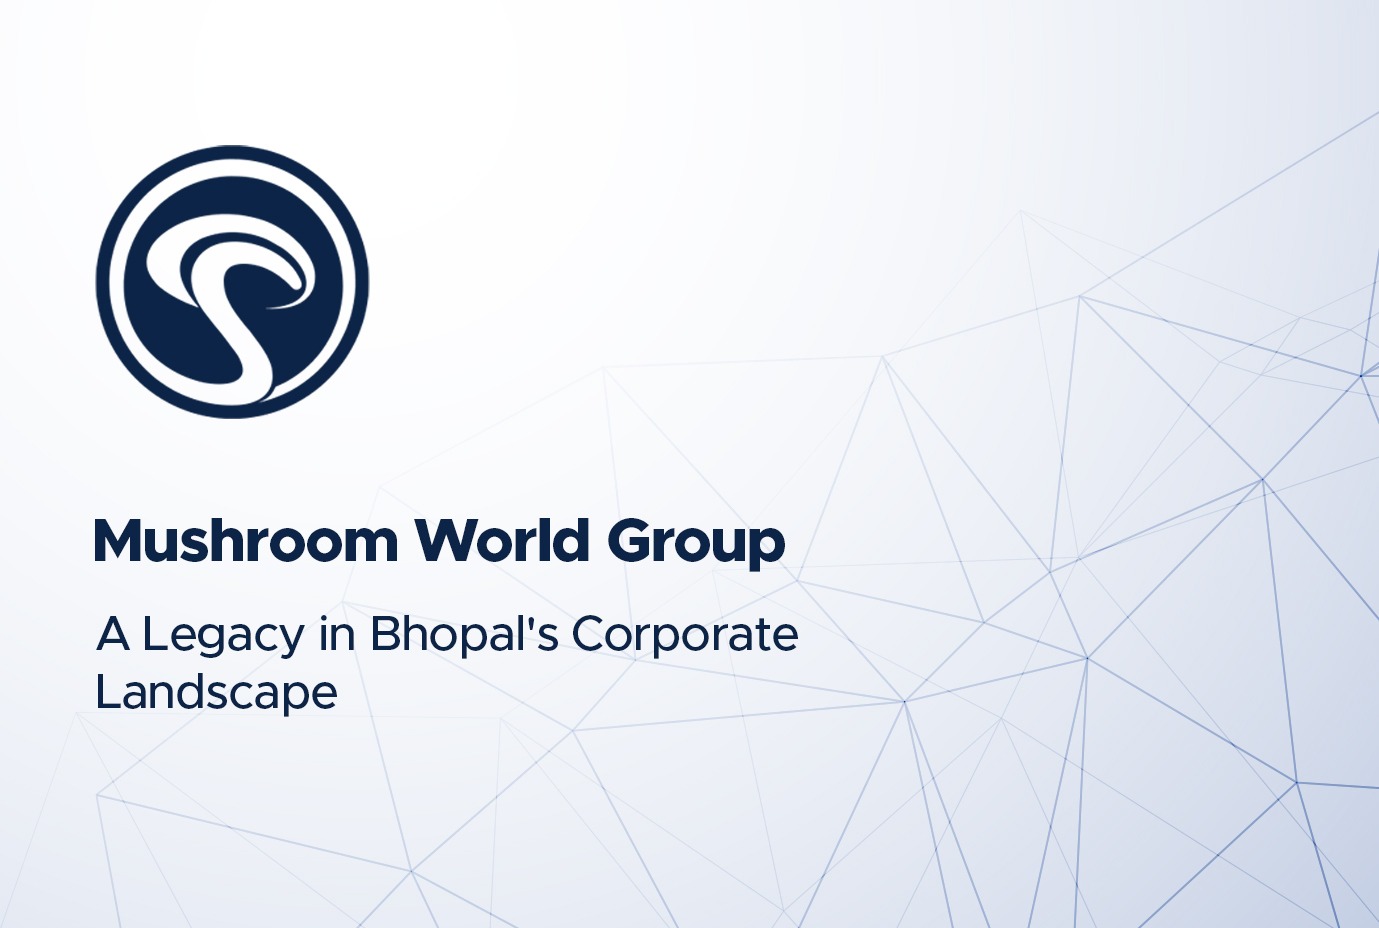 The Mushroom World Group: A Legacy in Bhopal’s Corporate Landscape